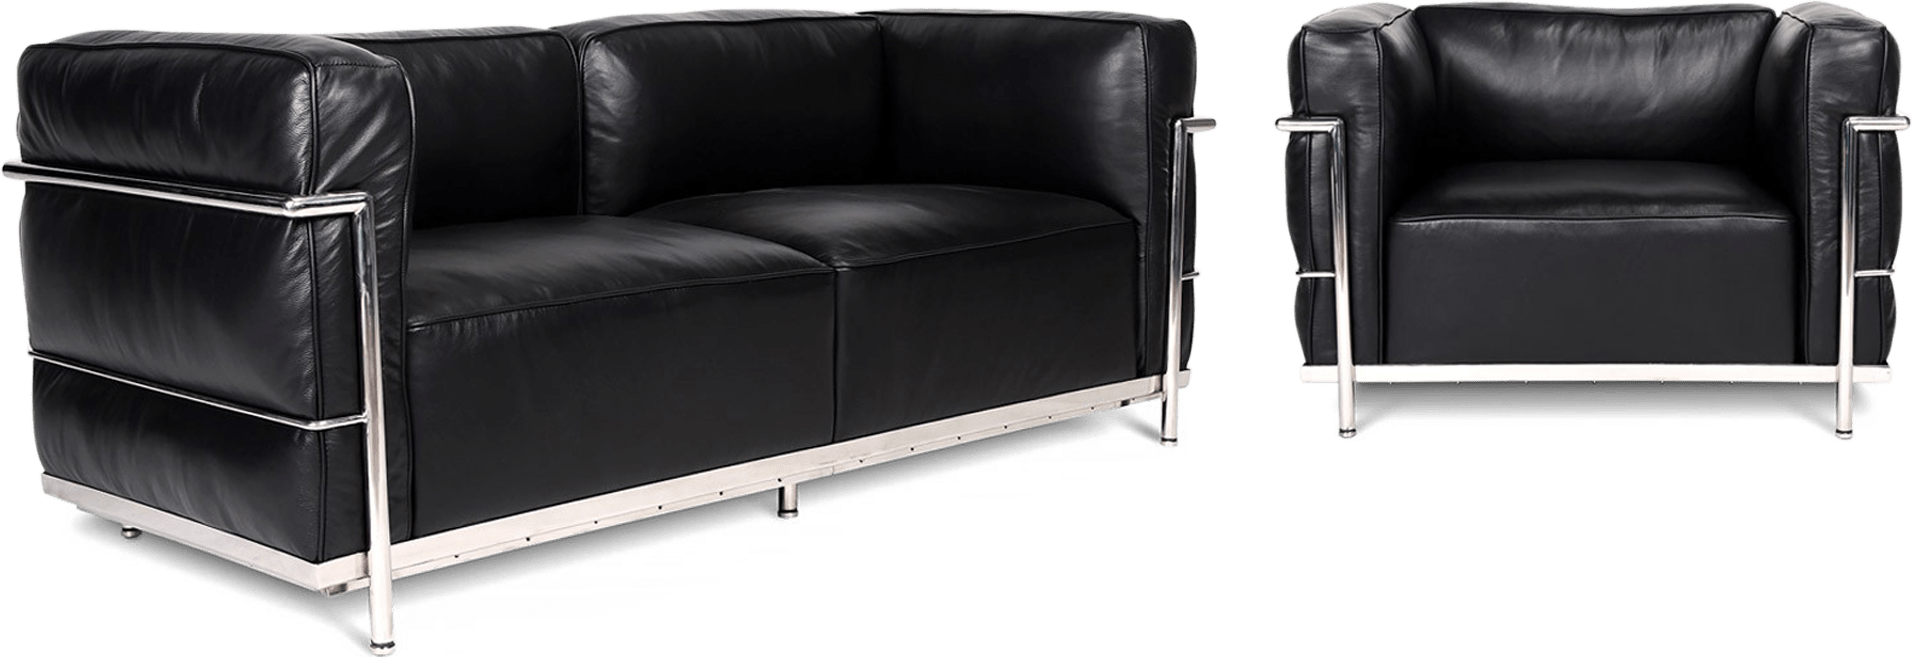 Grand Sofa 2 places style LC3 Black  image.